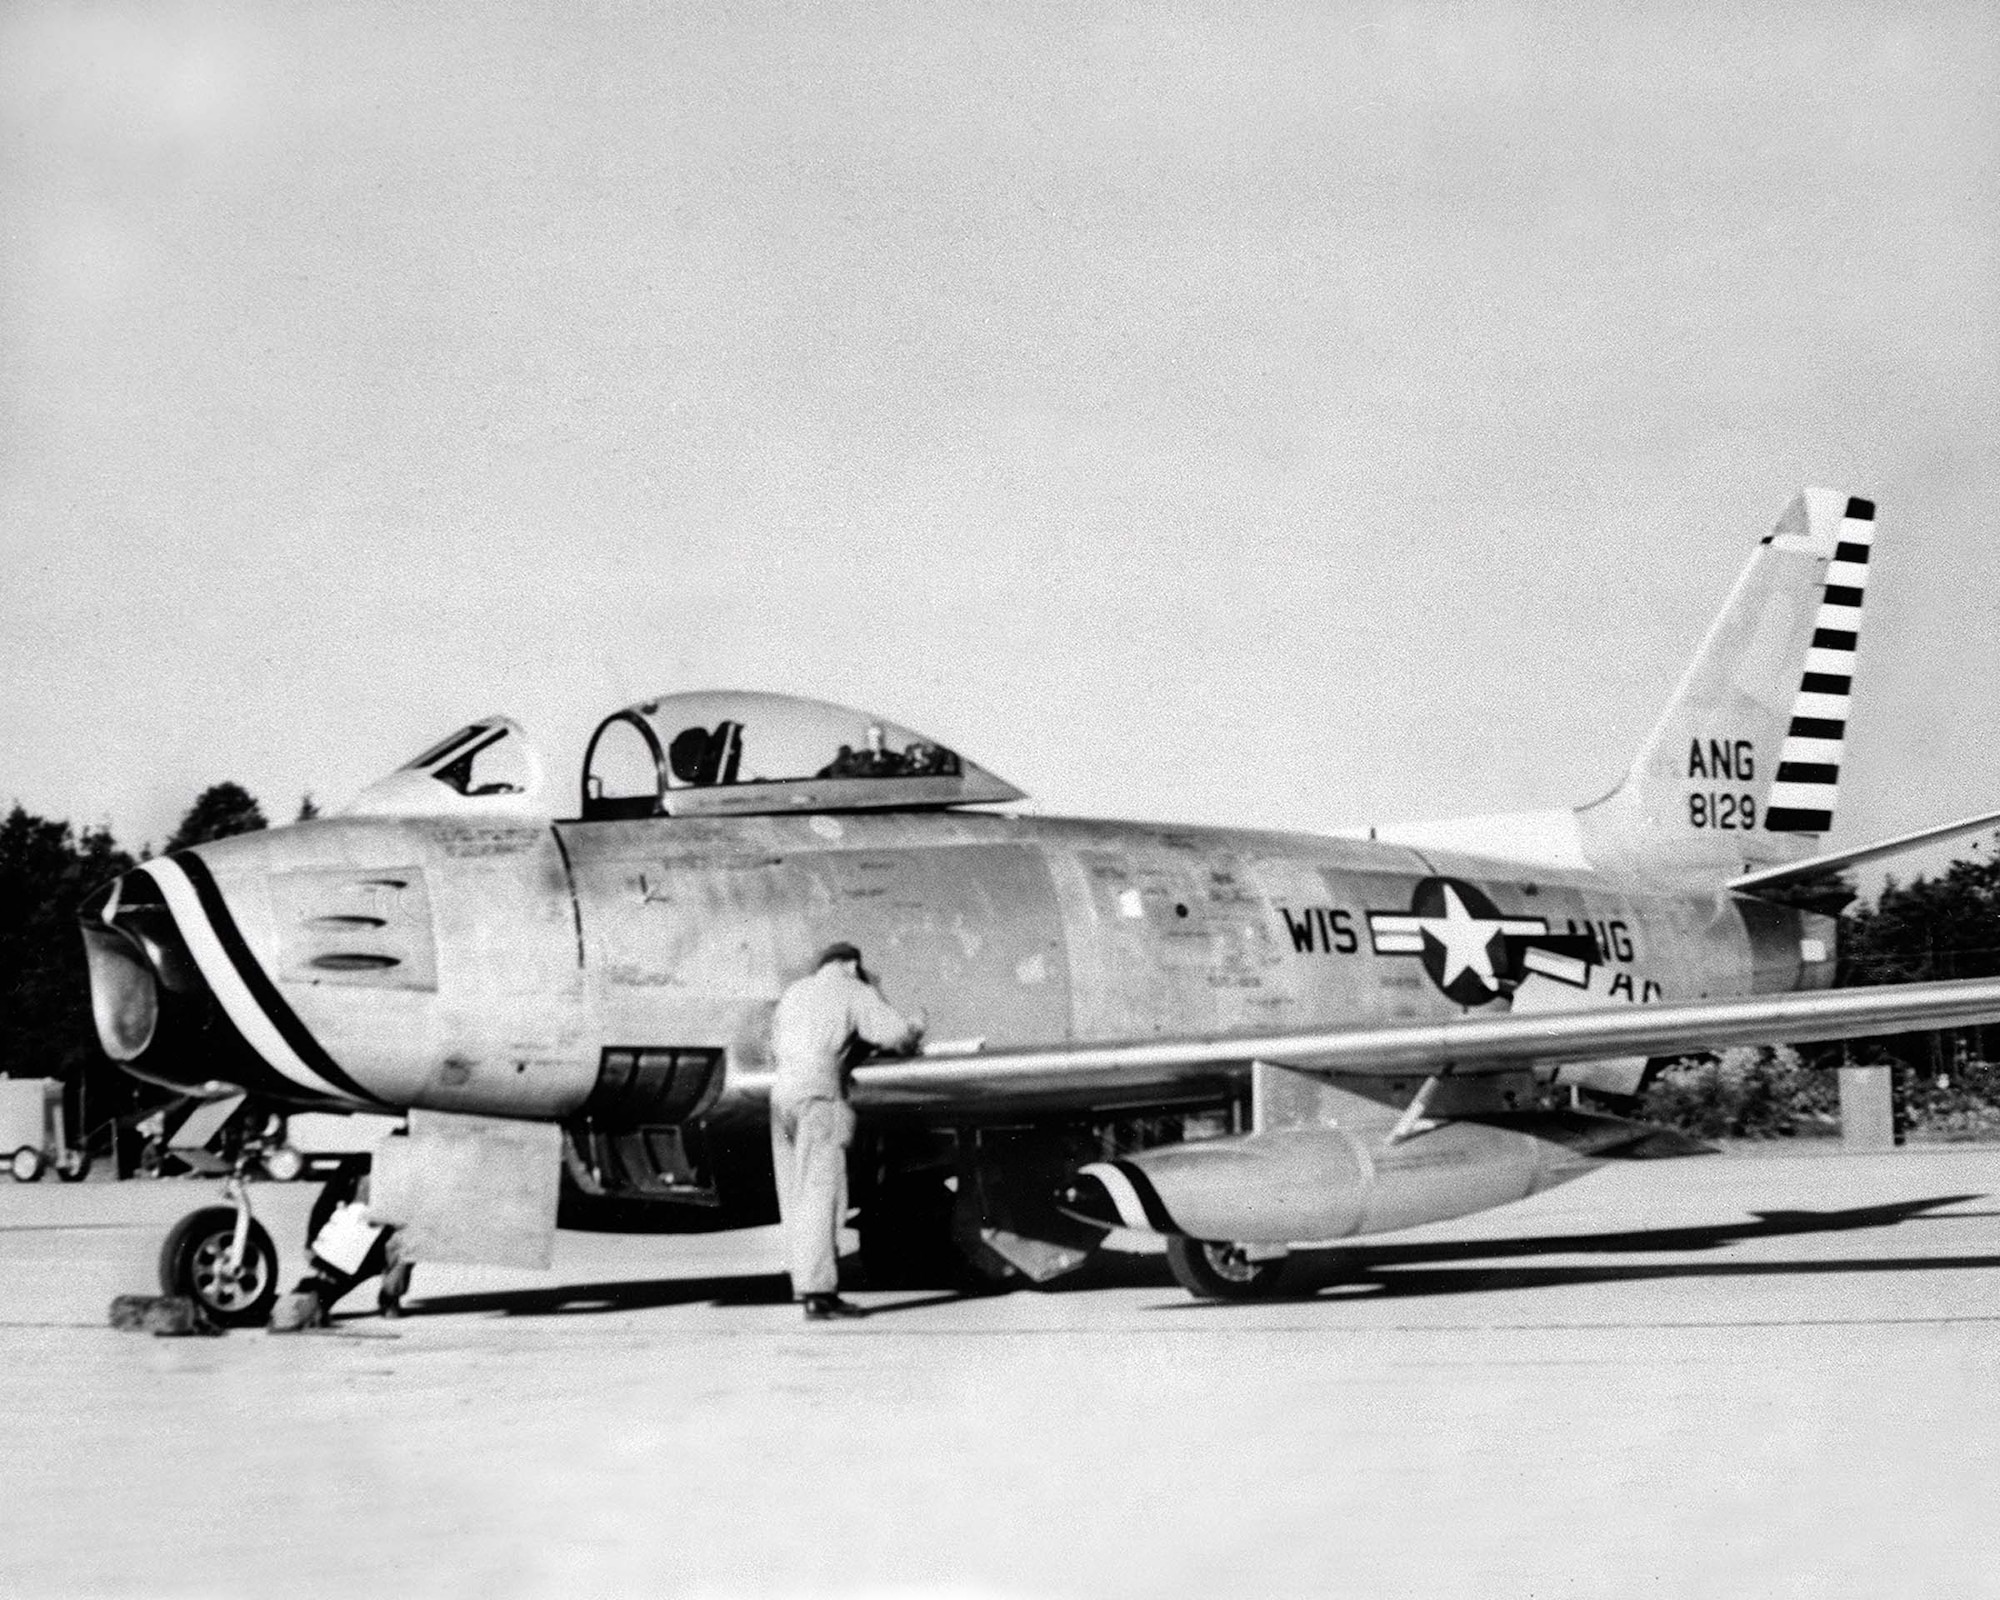 F-86 Sabre Jets were flown by the 126th fighter wing from 1953-1954.